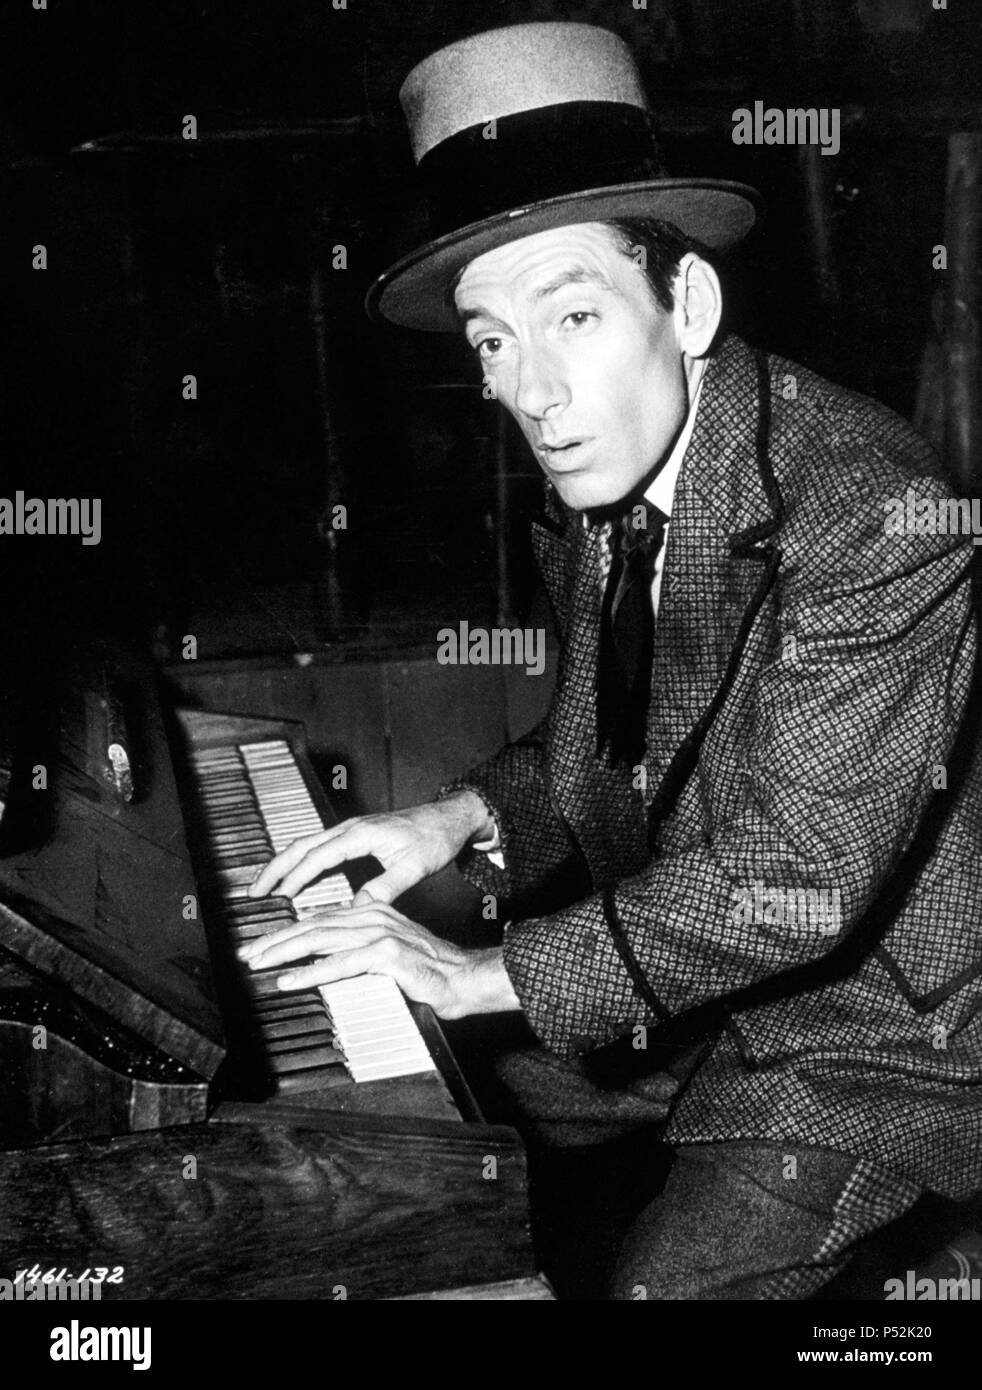 American composer and pianist Hoagy Carmichael. Stock Photo